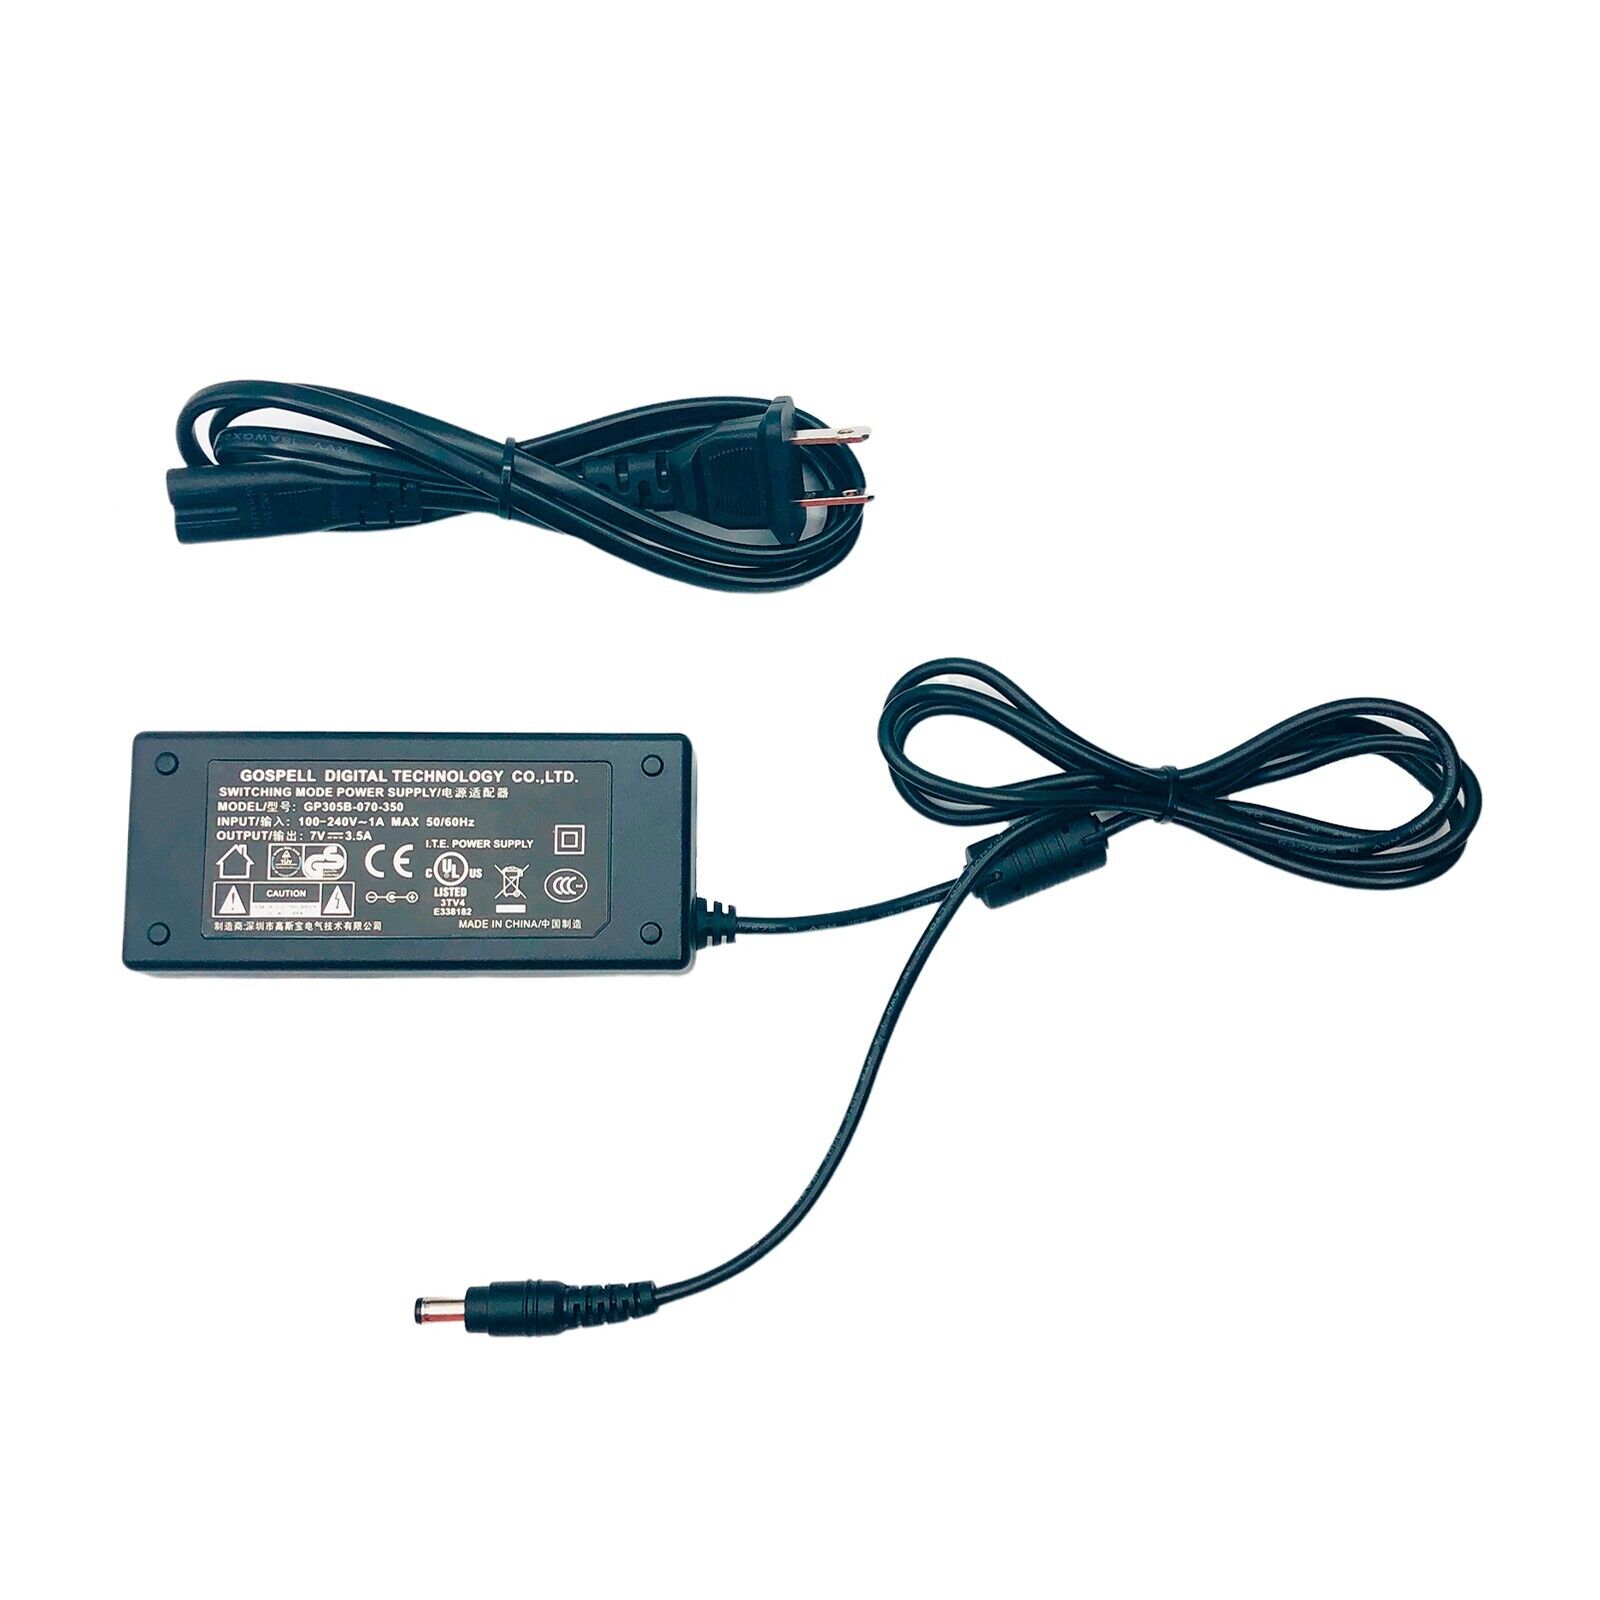 Original Switching Power Supply Adapter for VeriFone POS Terminals w/Cord